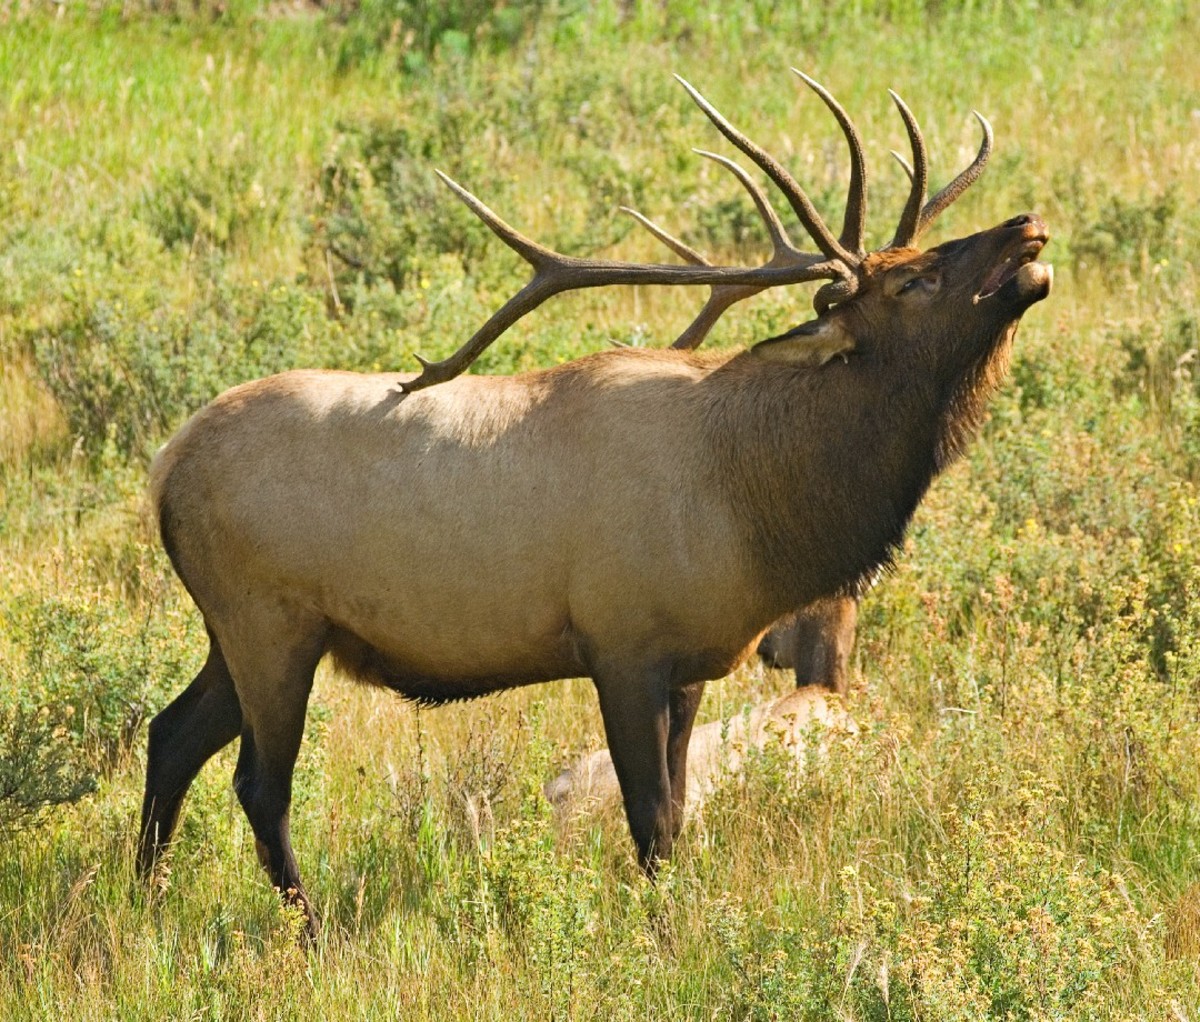 A picture of an elk bugling.